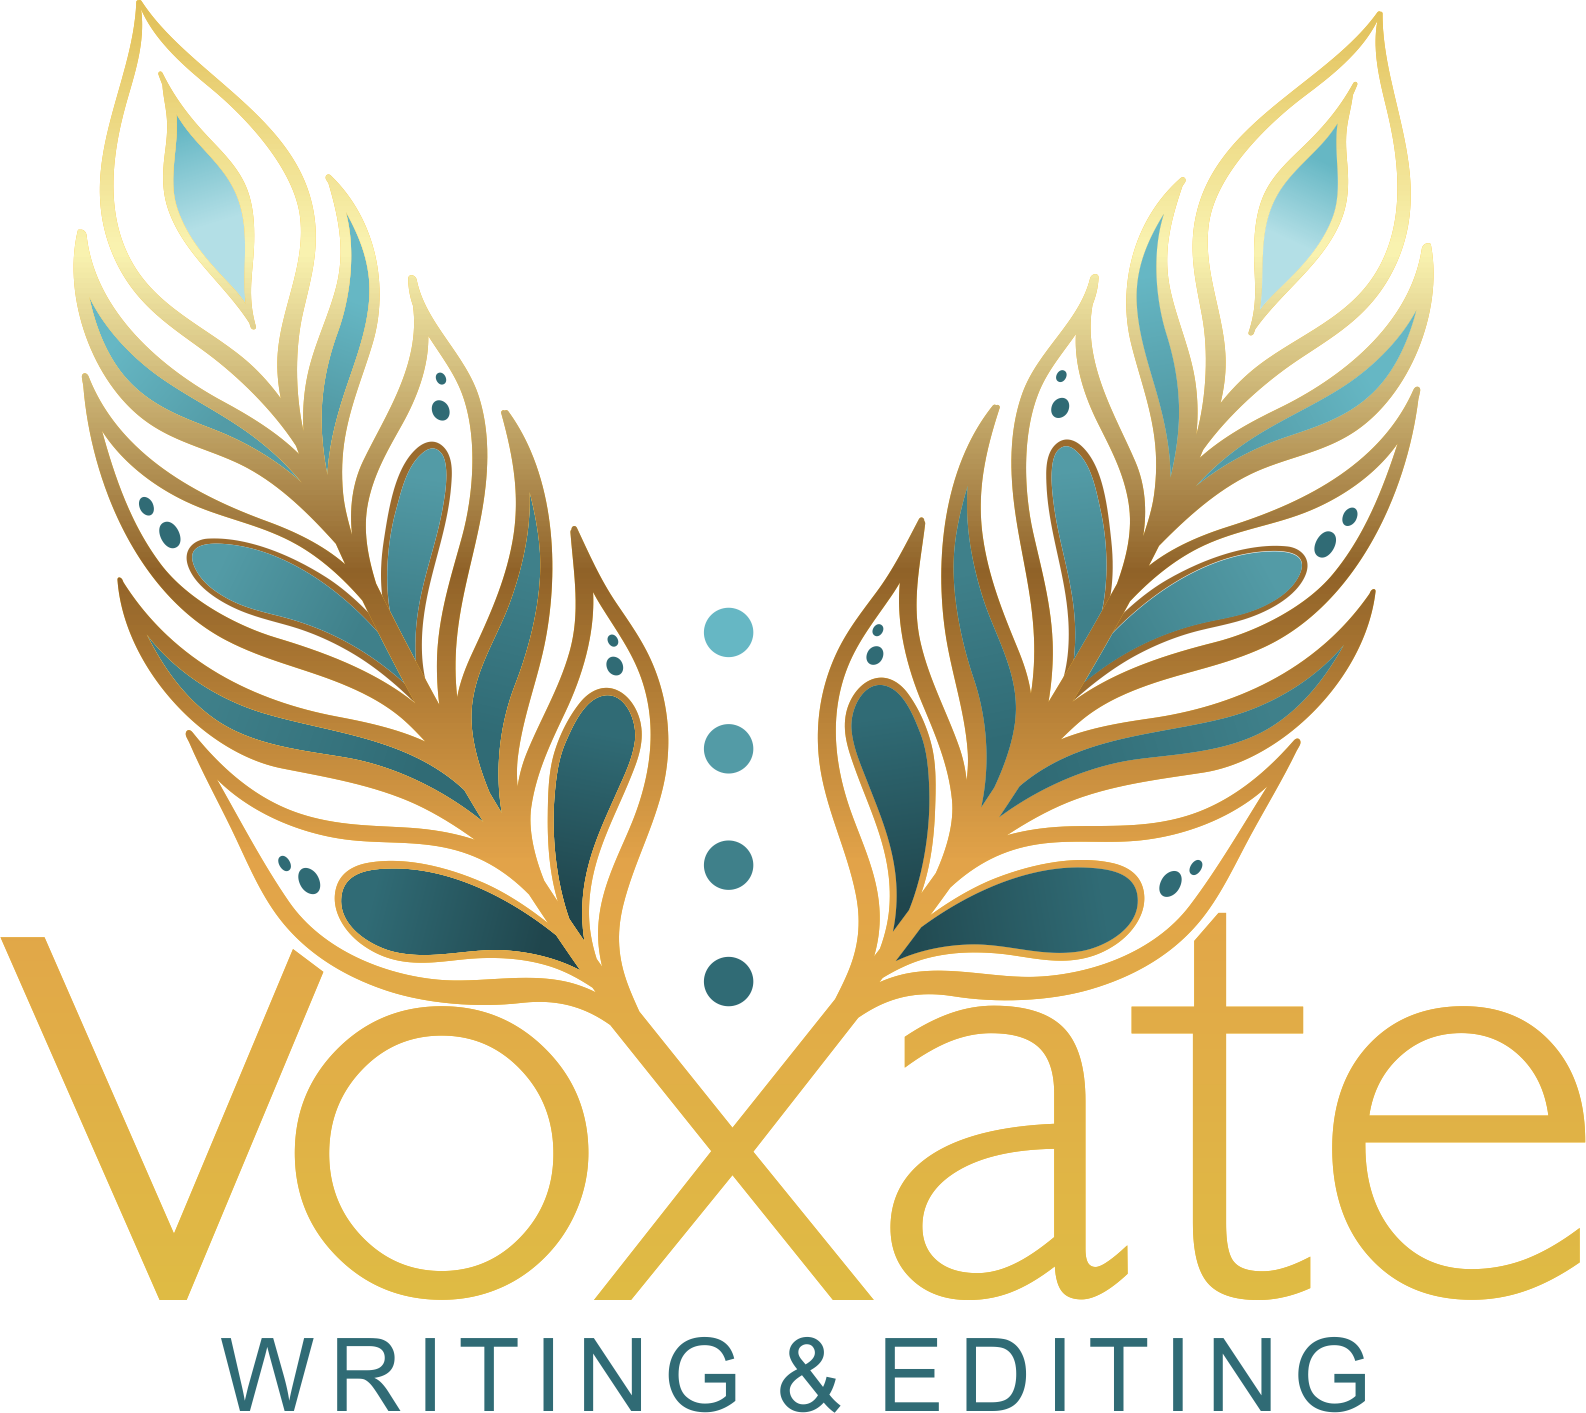 Voxate Writing & Editing - Lawyer (1586x1413)